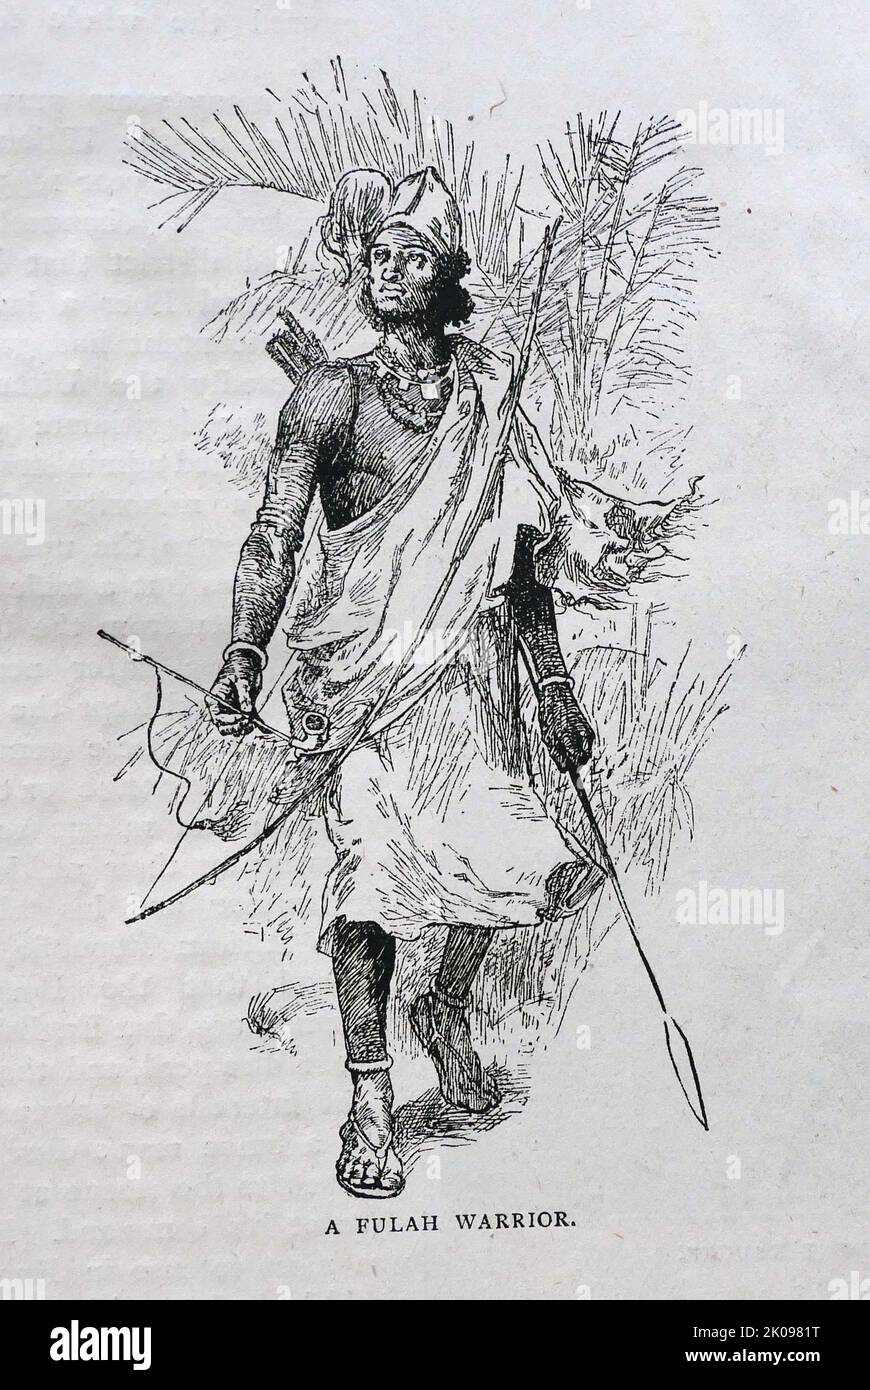 A Fulah Warrior. The Fula, Fulani, or Fulbe people are one of the largest ethnic groups in the Sahel and West Africa, widely dispersed across the region. Black and white drawing. Stock Photo